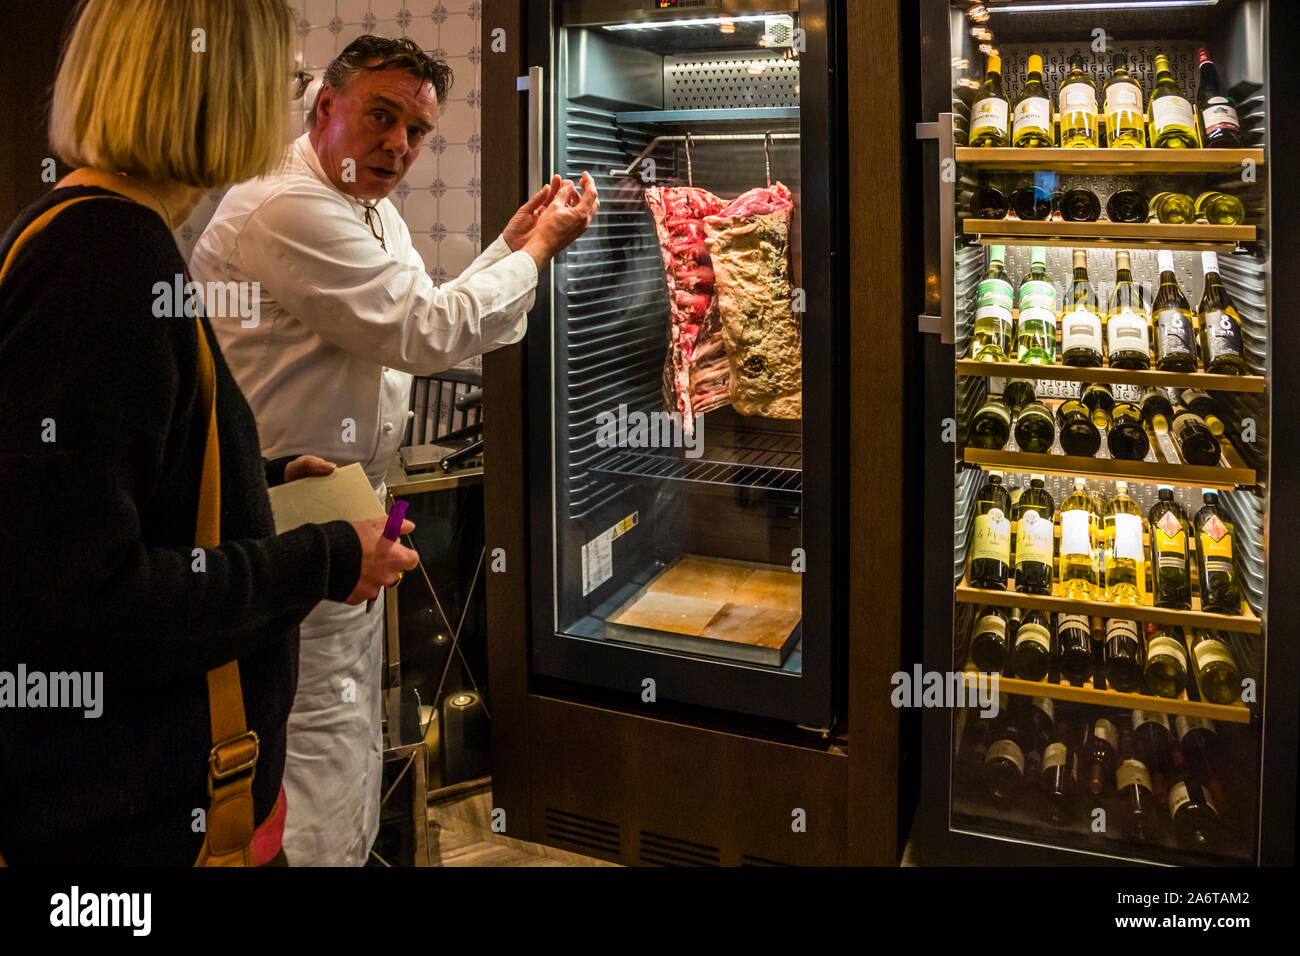 Aged to perfection - Chef Jupp Osterloh in the Dunloe Hotel near Killarney, Ireland. In the entrance area to the restaurant all guests pass the Dry Aging refrigerators Stock Photo